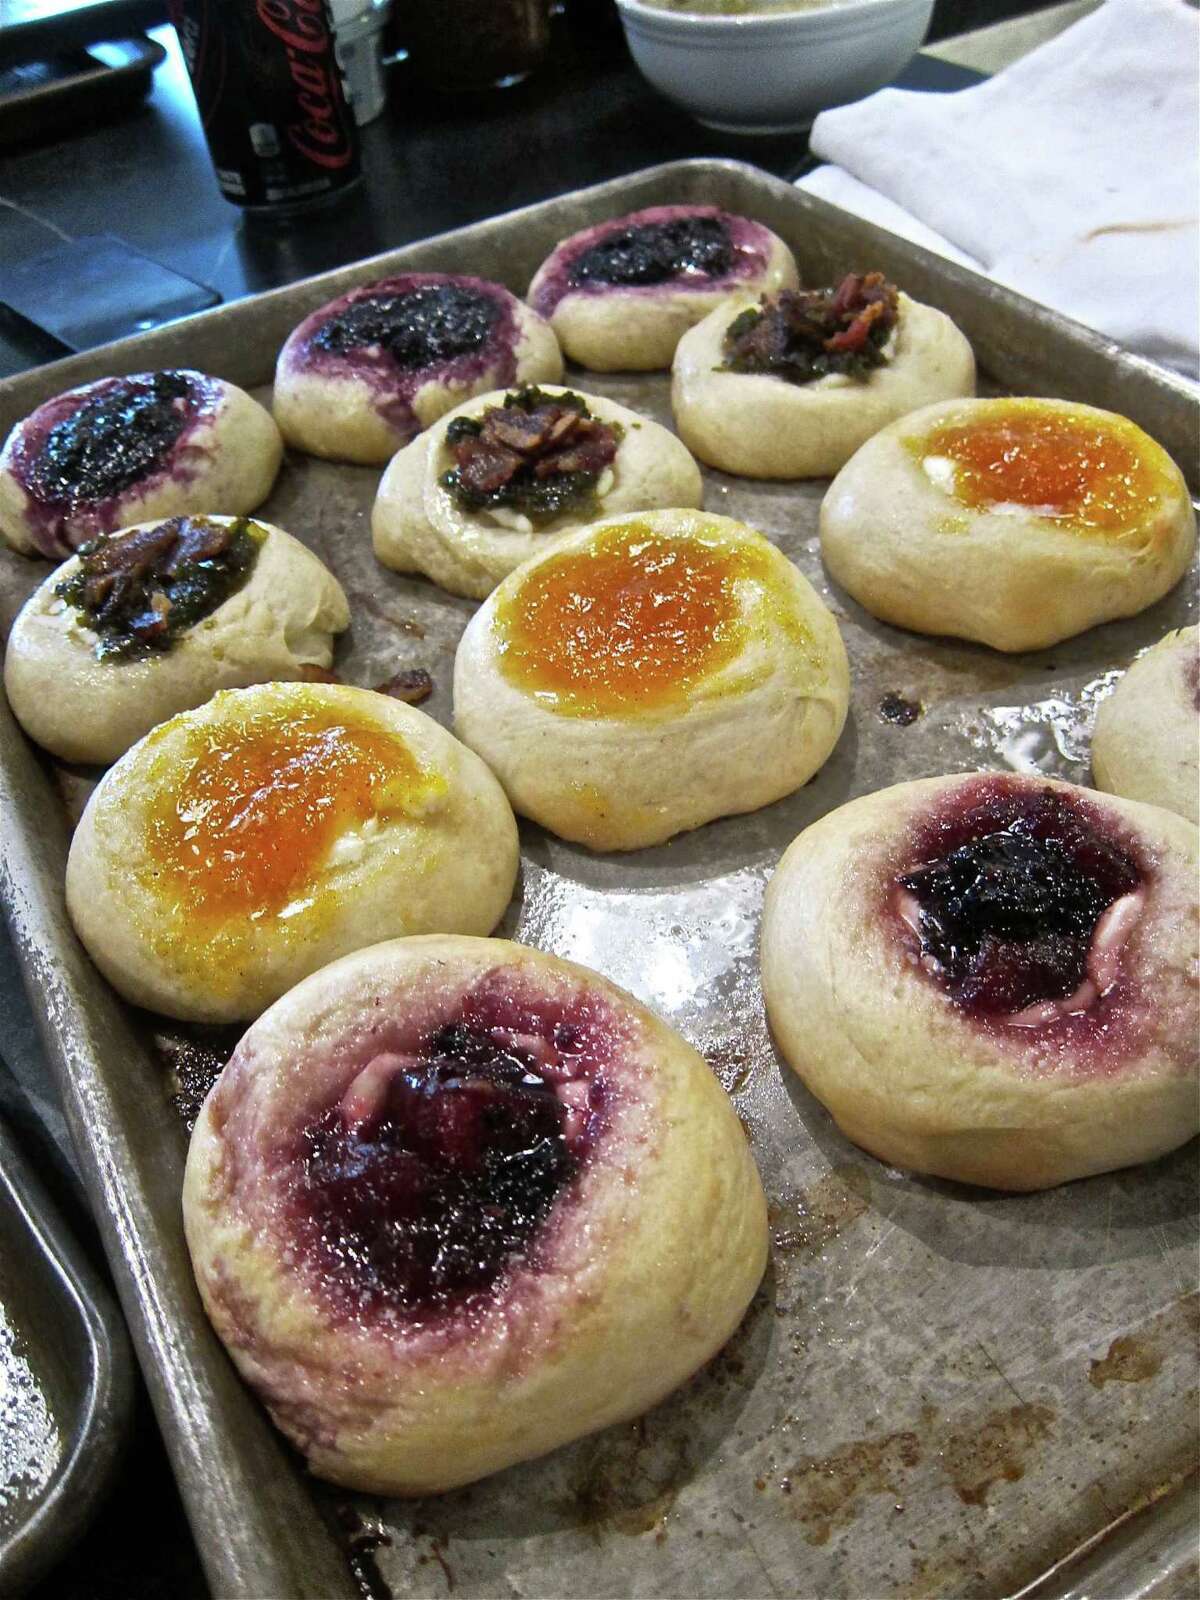 Finished kolaches at the home of Victoria Rittinger.